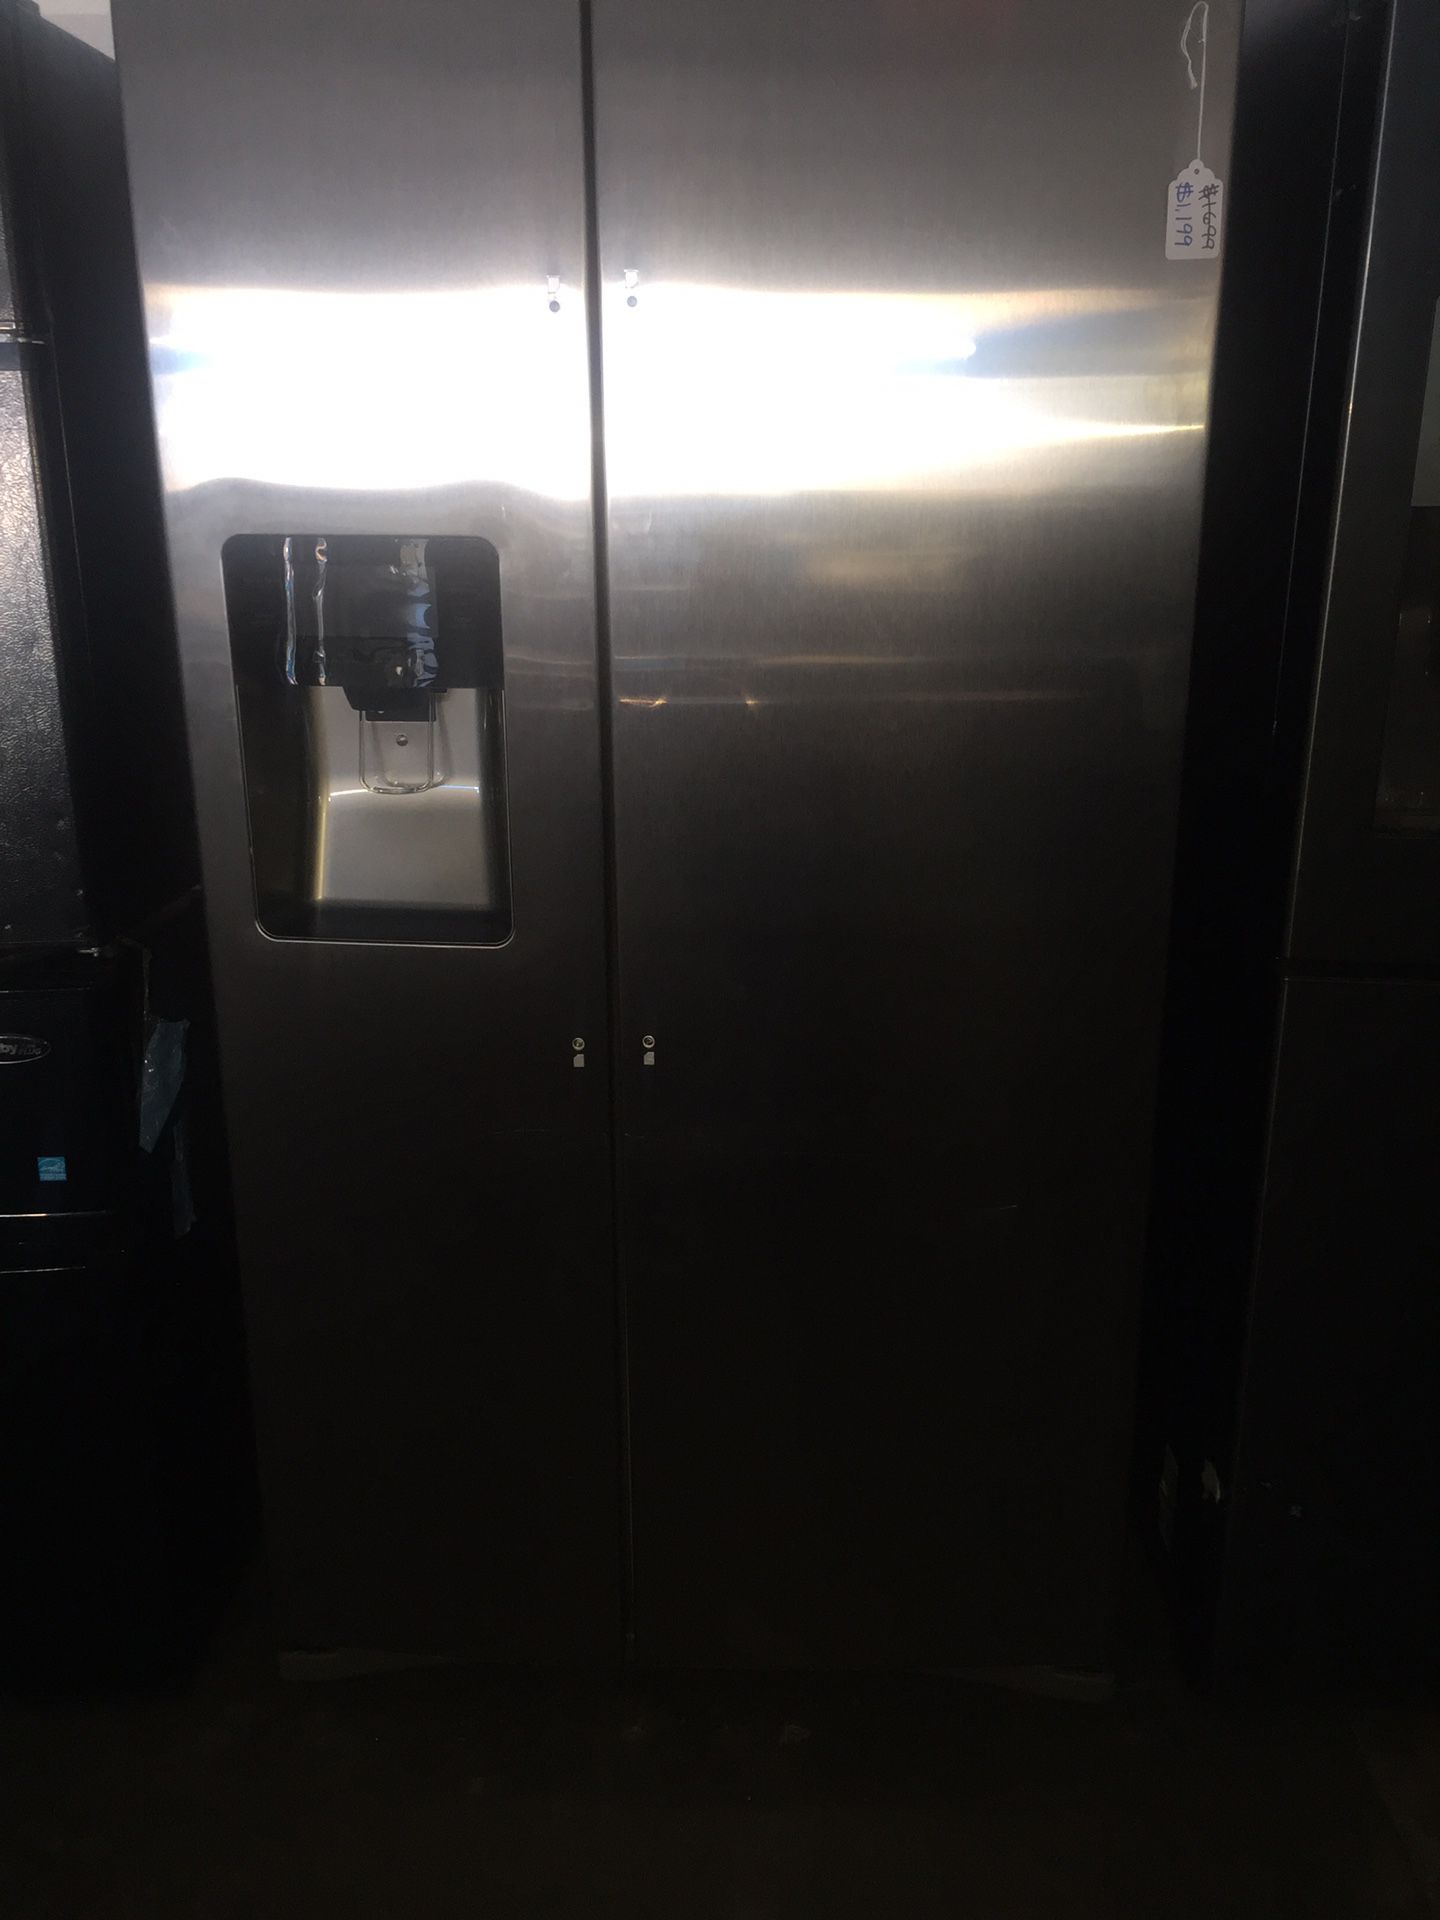 Samsung Stainless Steel Side By Side Refrigerator